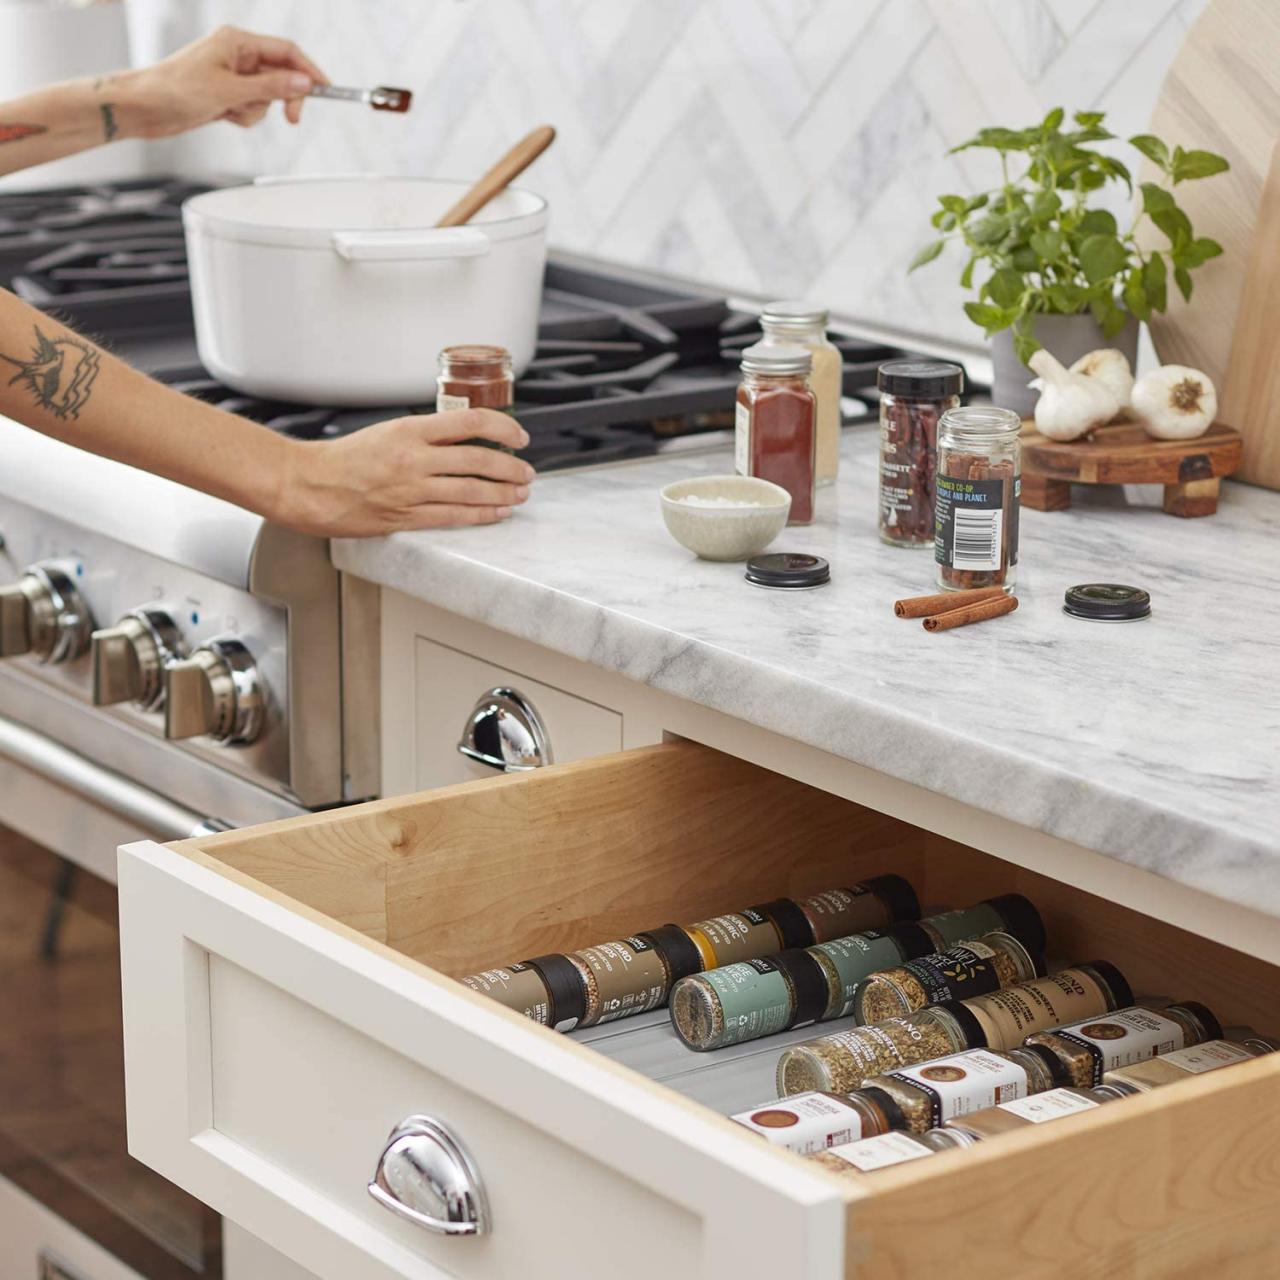 Top 5 Spice Jar To Organize Your Kitchen Better